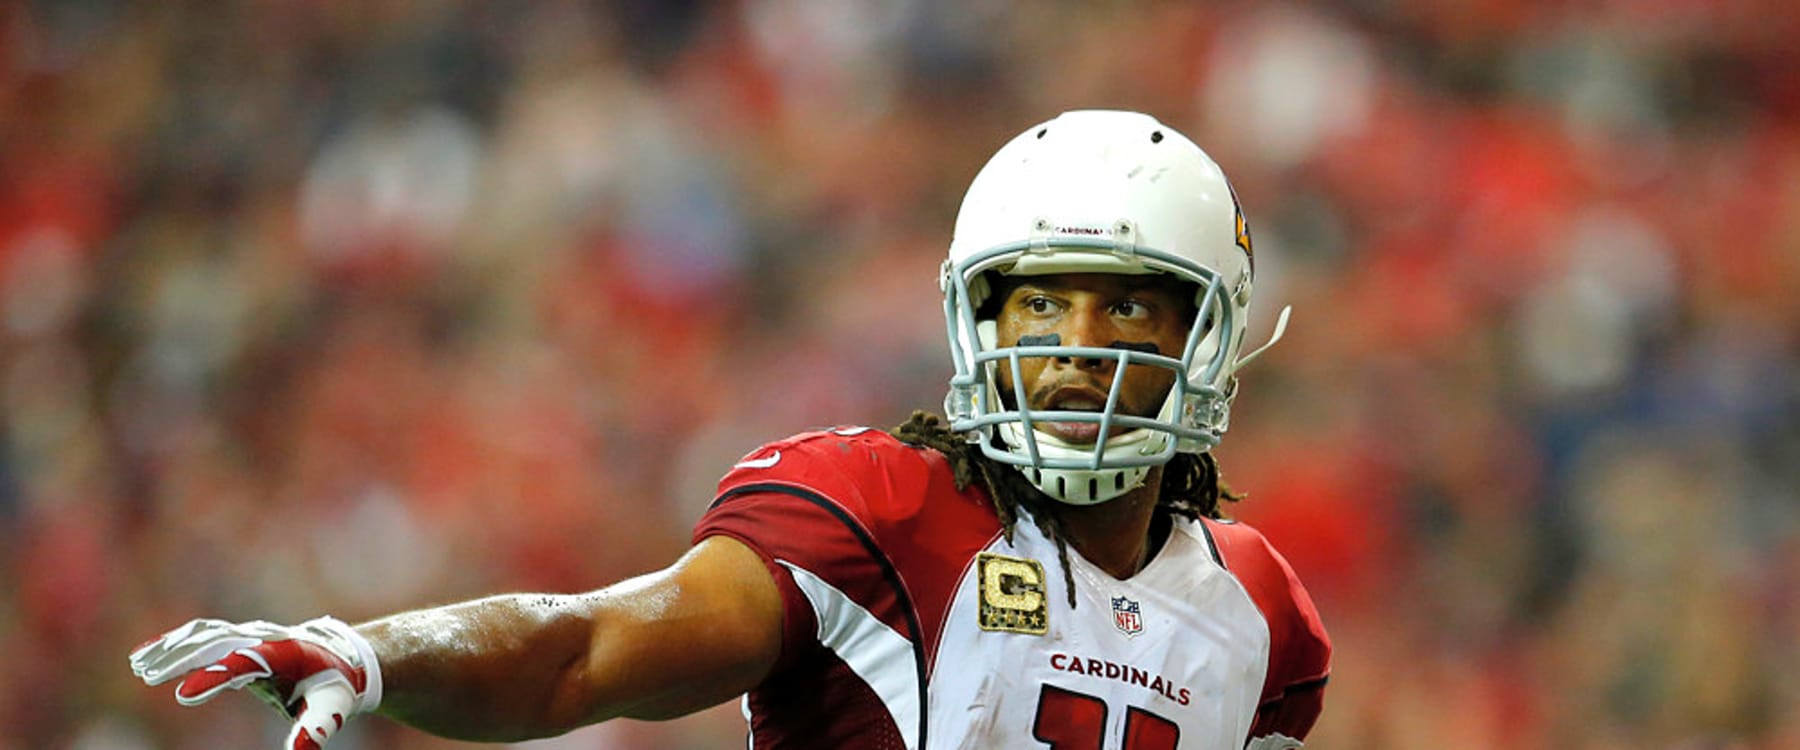 Larry Fitzgerald Fantasy Profile: News, Stats & Outlook for 2023